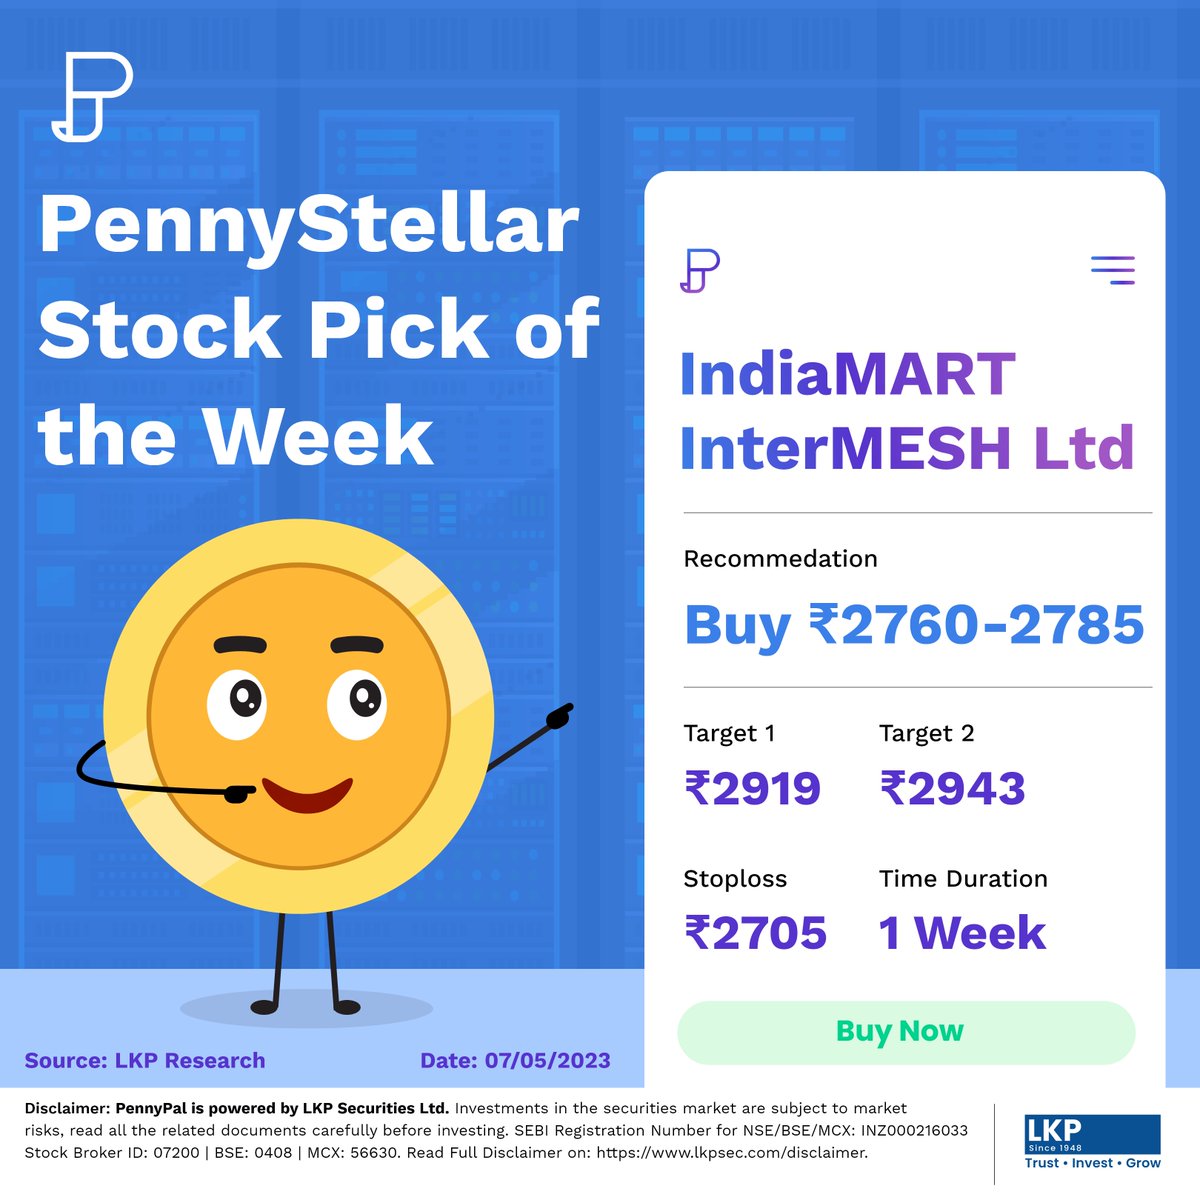 Hey everyone, PennyStellar just dropped a solid stock pick after some thorough research. Time to update those portfolios!

#pennypal #indiamart #stockpicks #stocksandshares #stockrecommendation #stockmarketindia #sharemarketnews #investments #tradingtips #stockstowatch